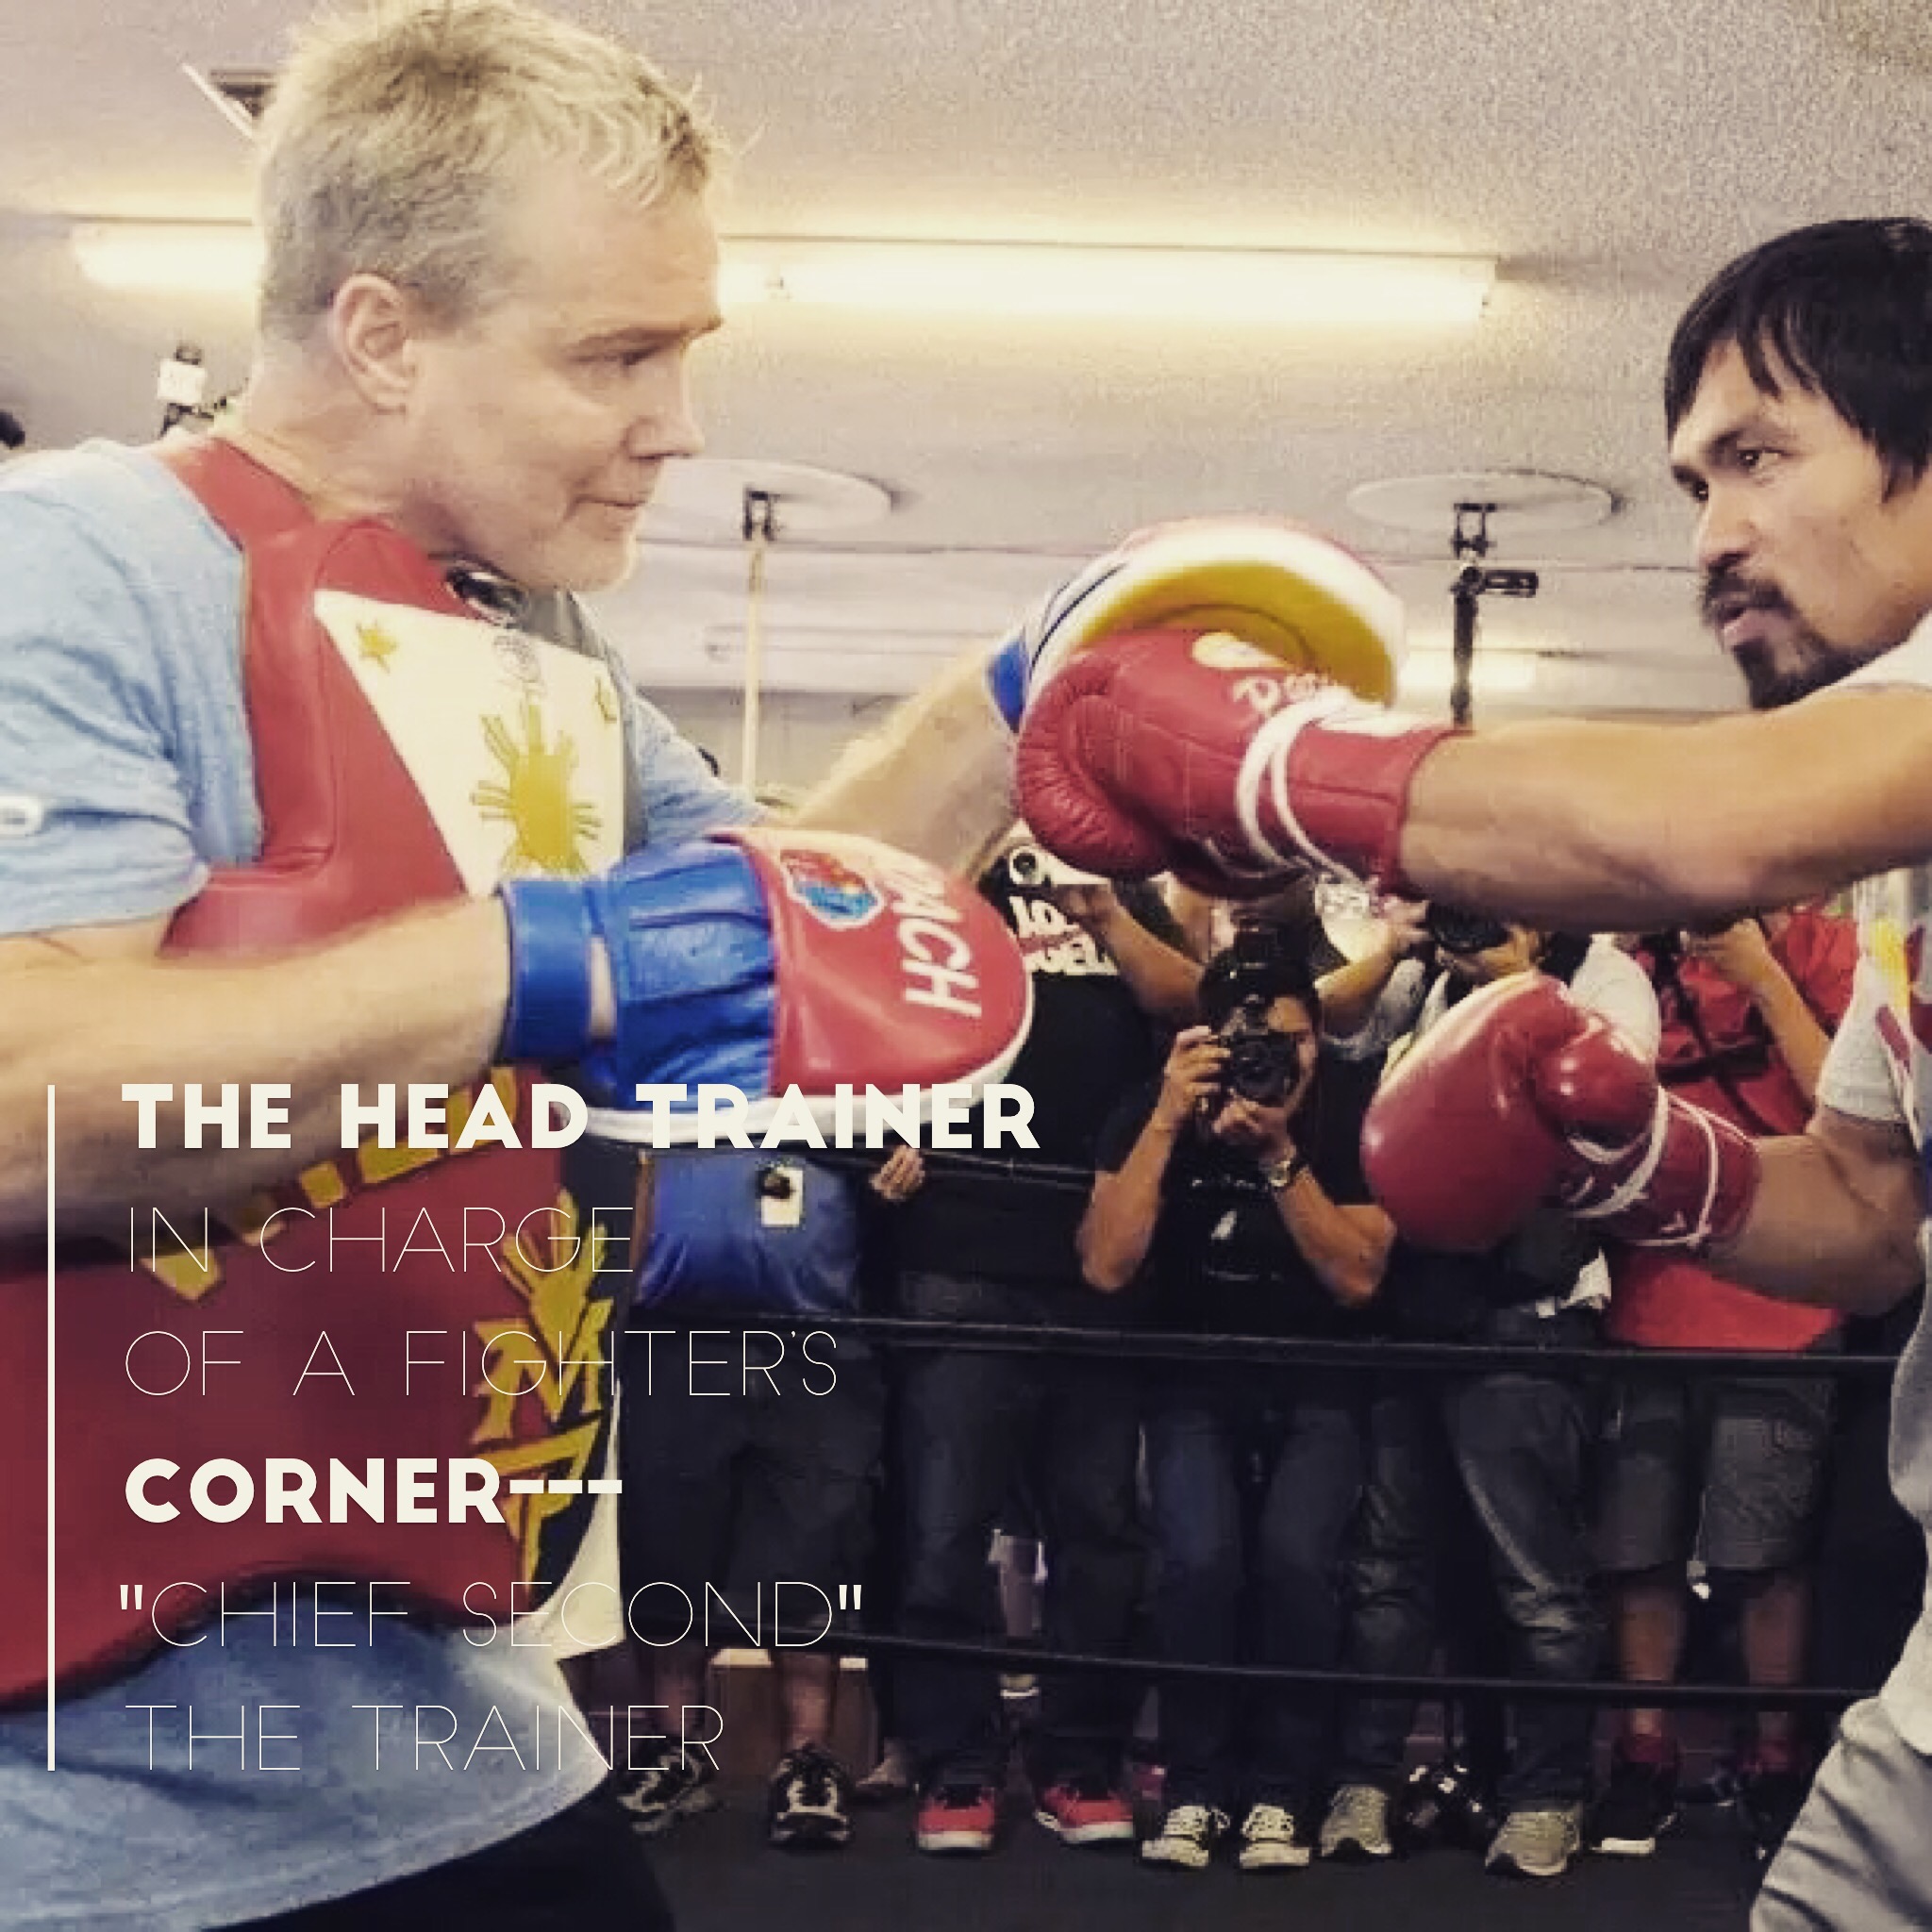 The head trainer in charge of a fighter’s corner— “Chief Second” The Trainer 